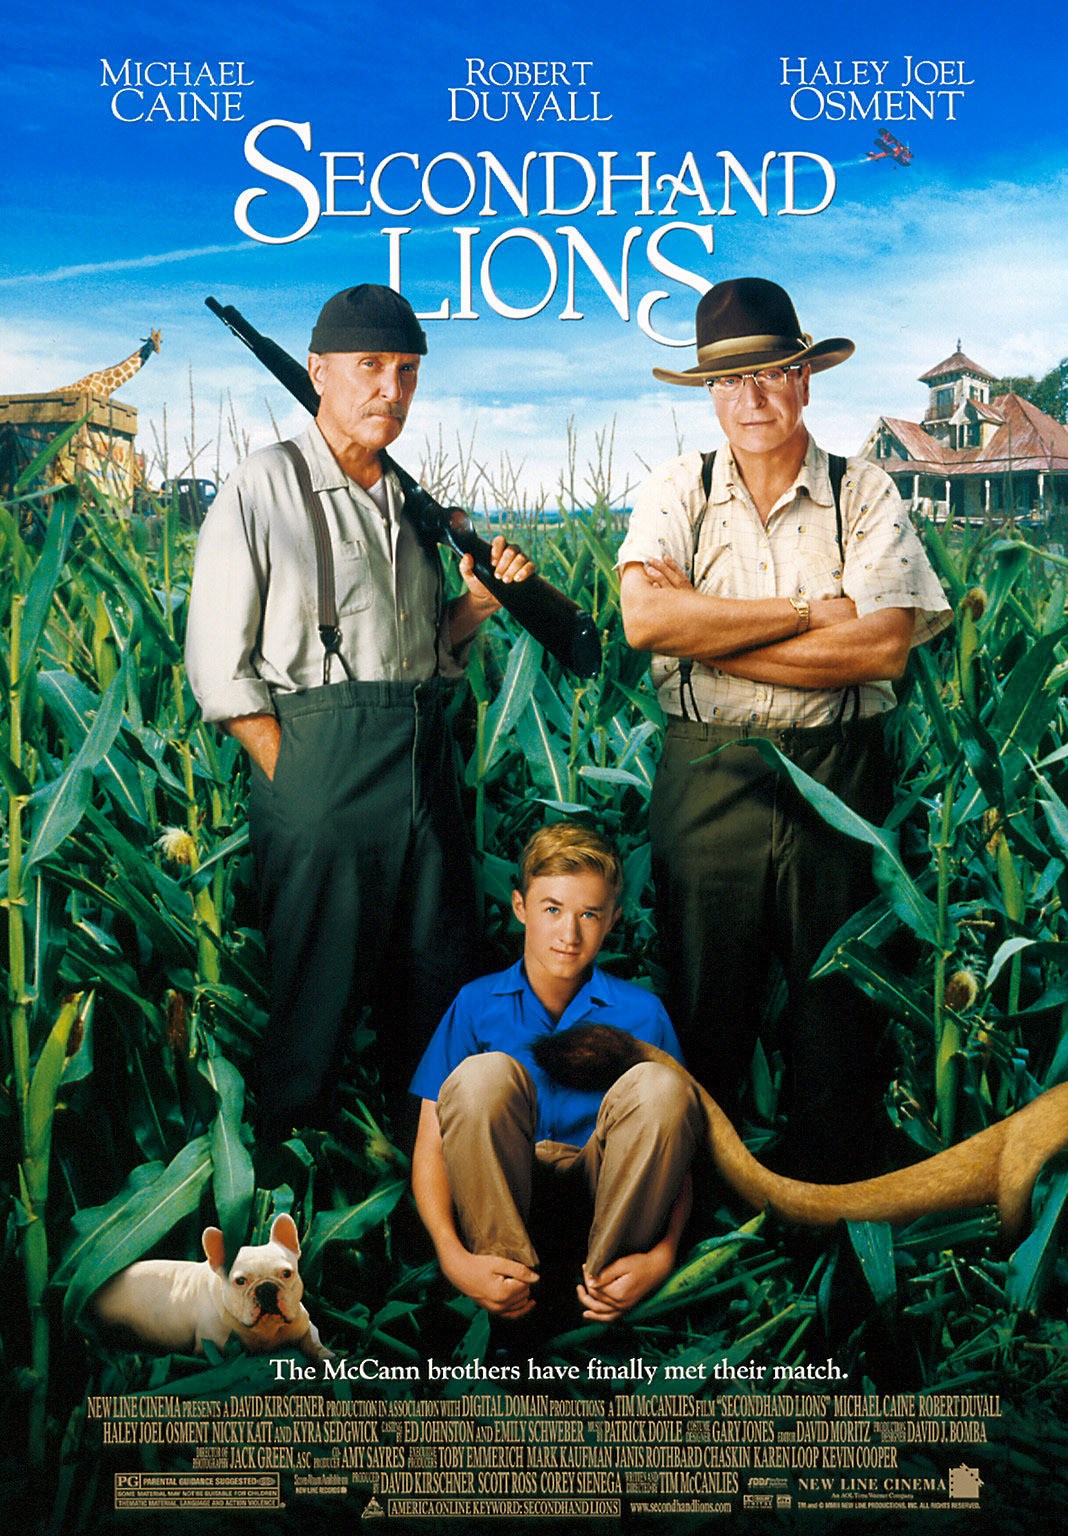 Secondhand Lions - Lion saves Walter and attacks Stan by getting injured  (Walter and Lion VS. Stan) 